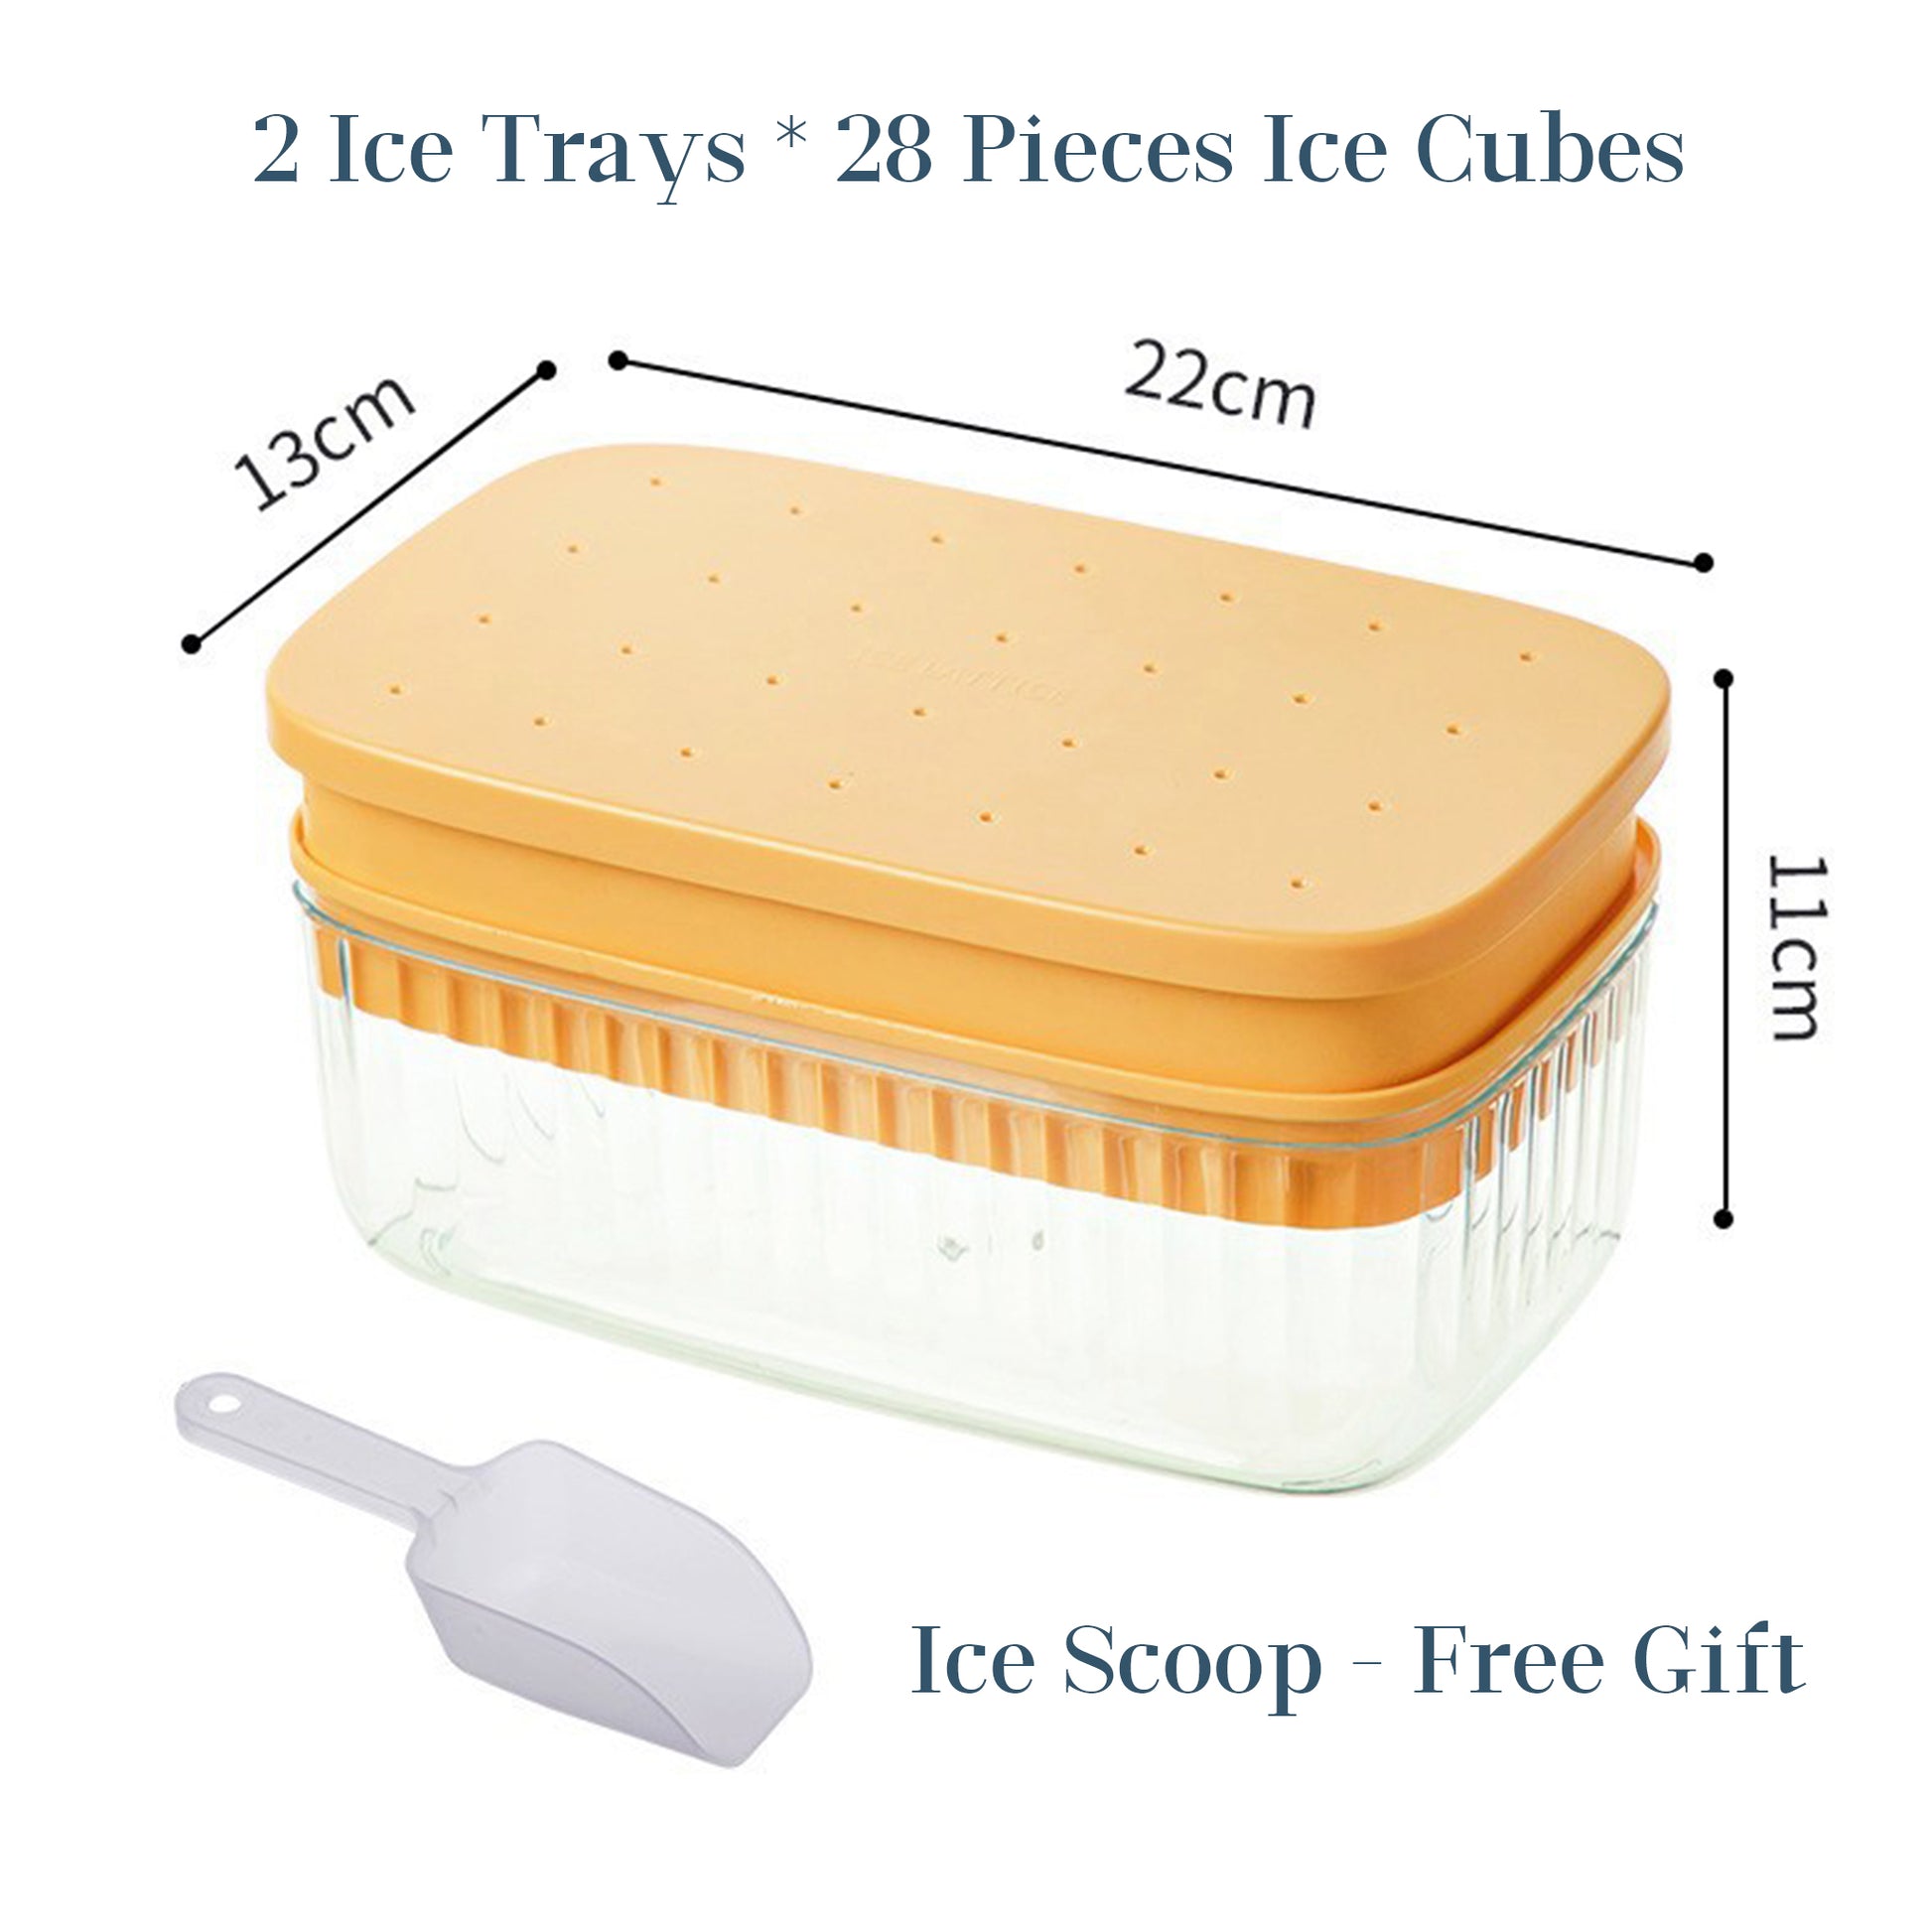 https://www.funsharings.com/cdn/shop/products/Stackable-Silicone-Ice-Cube-Trays-Press-Ice-Tray-Mold-with-Lid-Large-capacity-Ice-Storage-Box-for-Cocktails-Whiskey-Tea-Coffee-56-Pieces.jpg?v=1680796046&width=1946